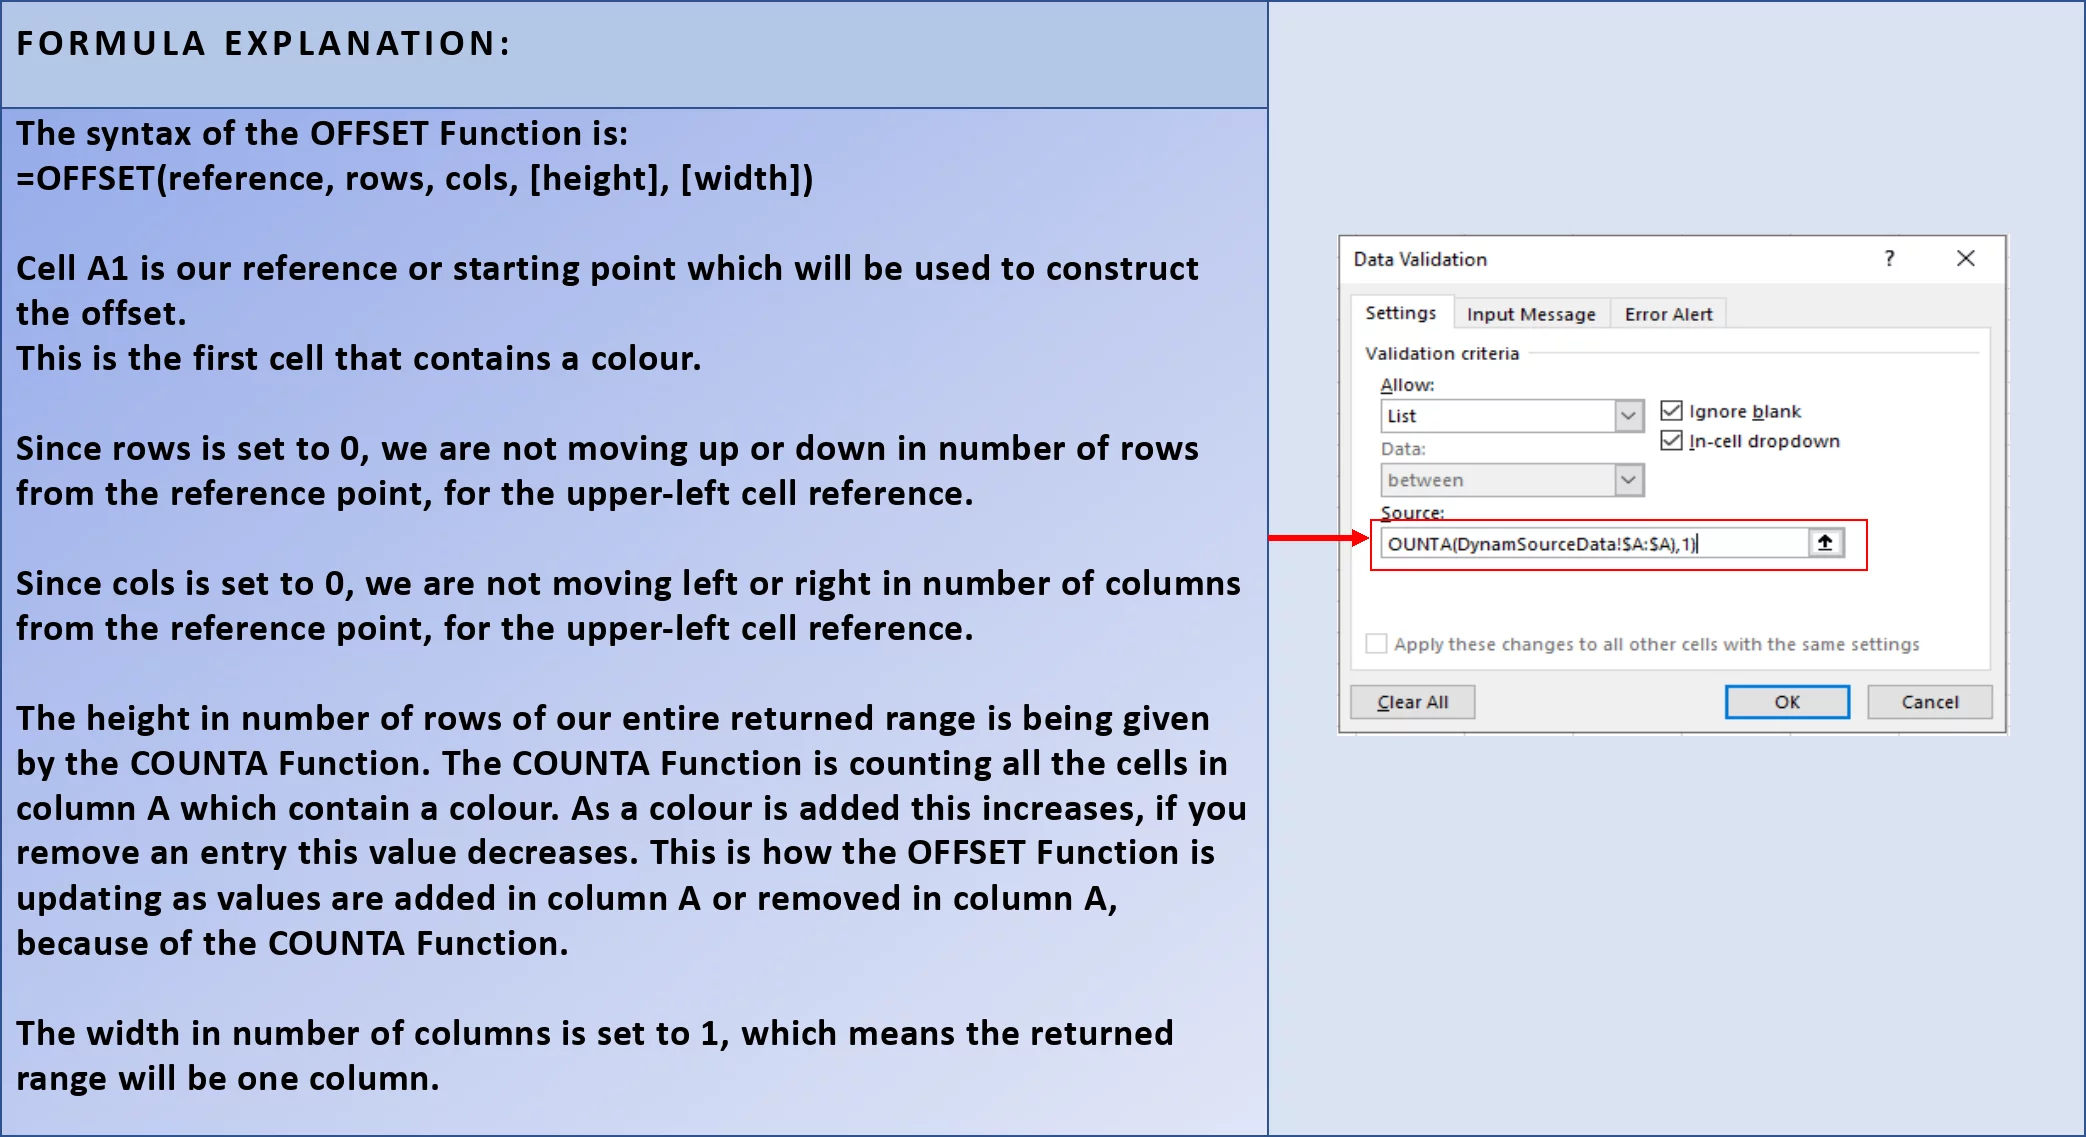 Screenshot showing the OFFSET formula explanation which is entered into the Source box of the Data Validation Dialog box